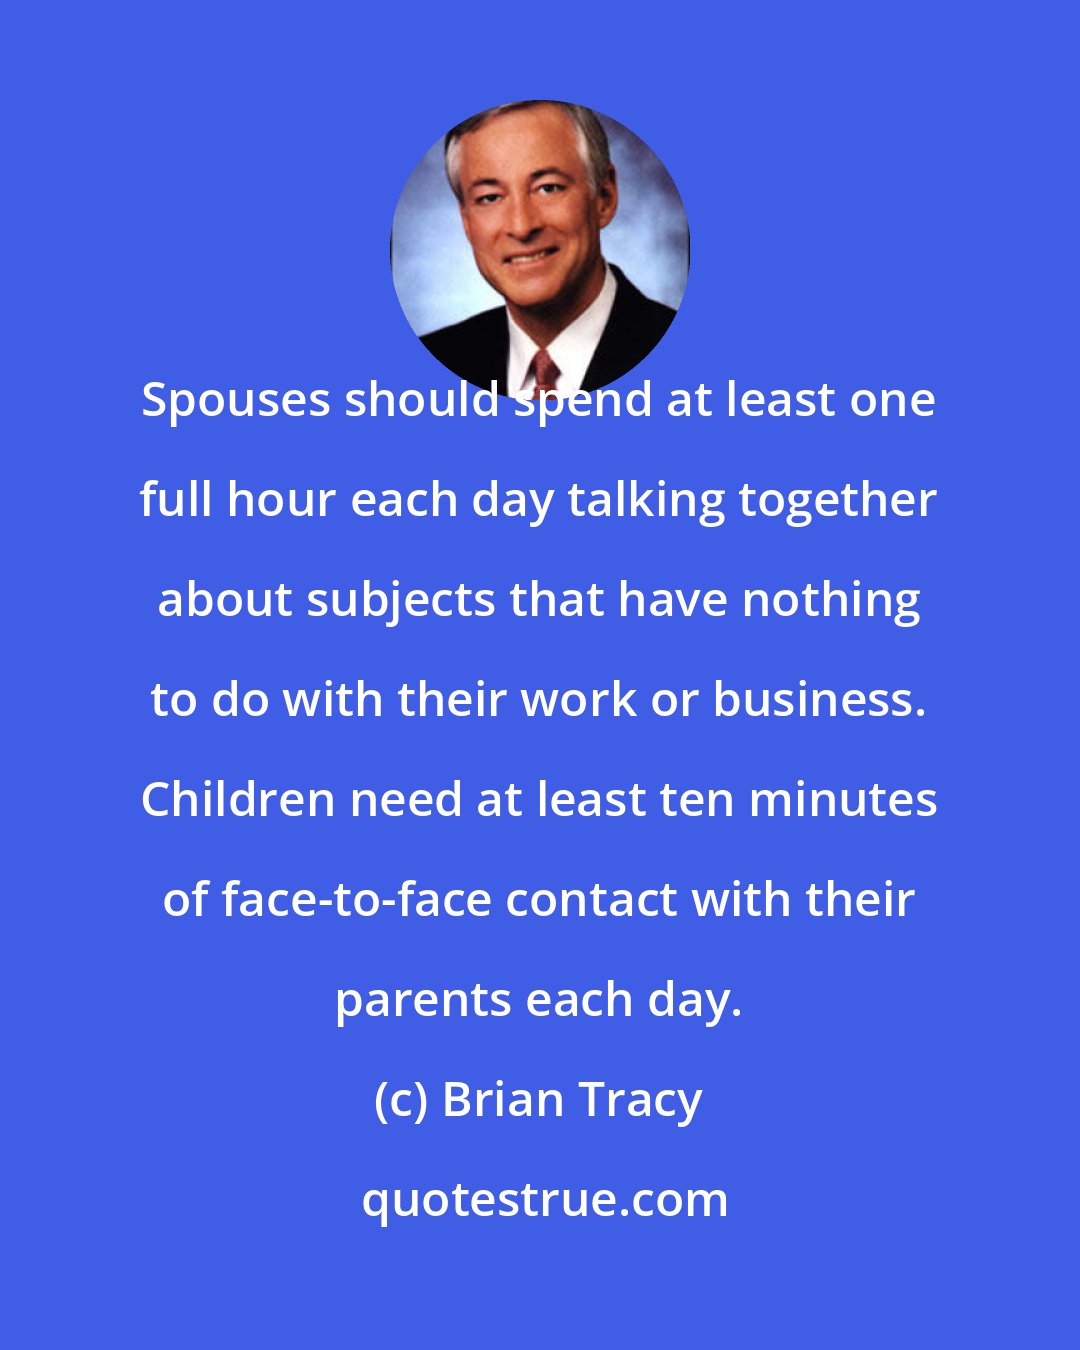 Brian Tracy: Spouses should spend at least one full hour each day talking together about subjects that have nothing to do with their work or business. Children need at least ten minutes of face-to-face contact with their parents each day.